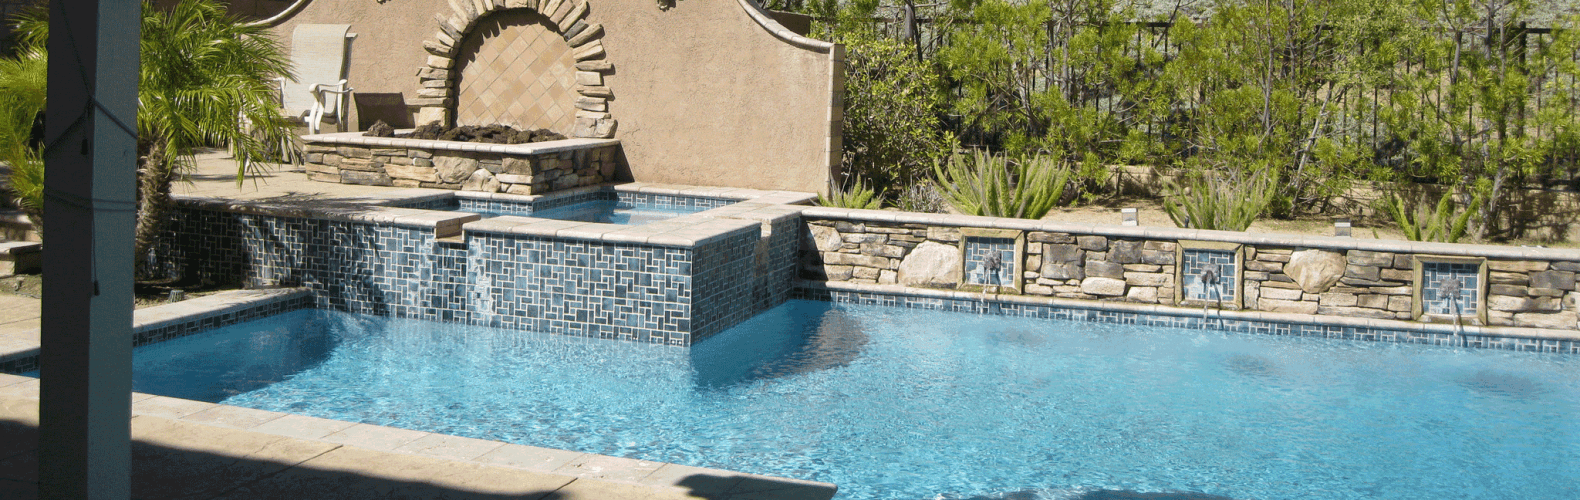 A to Z Pool Service - Simi Valley, CA, US, swimming pool